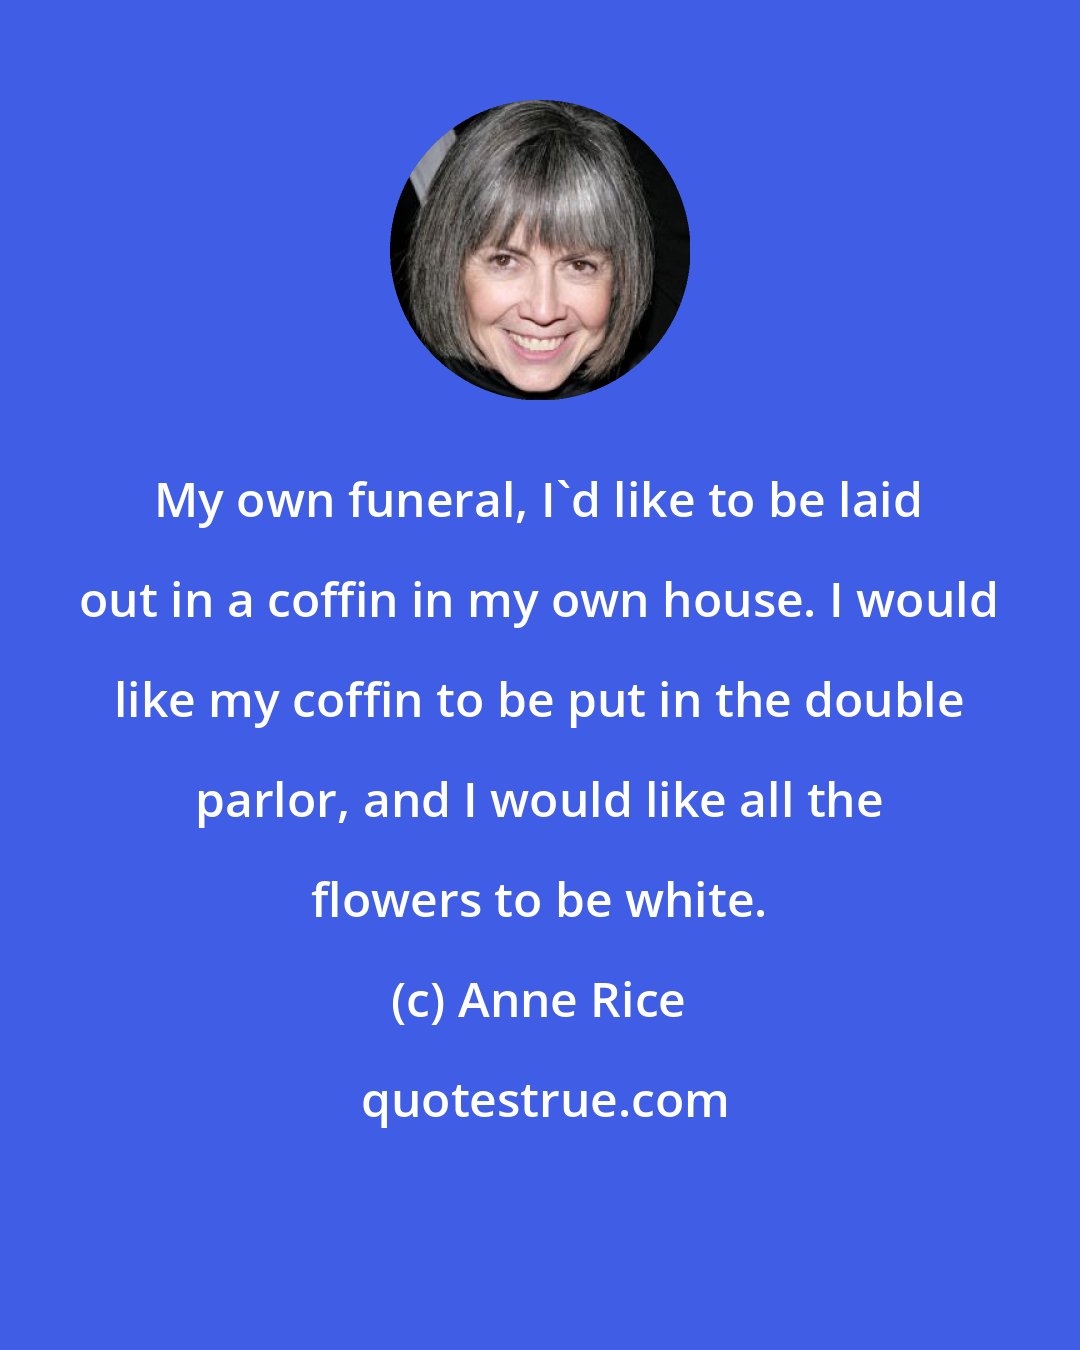 Anne Rice: My own funeral, I'd like to be laid out in a coffin in my own house. I would like my coffin to be put in the double parlor, and I would like all the flowers to be white.